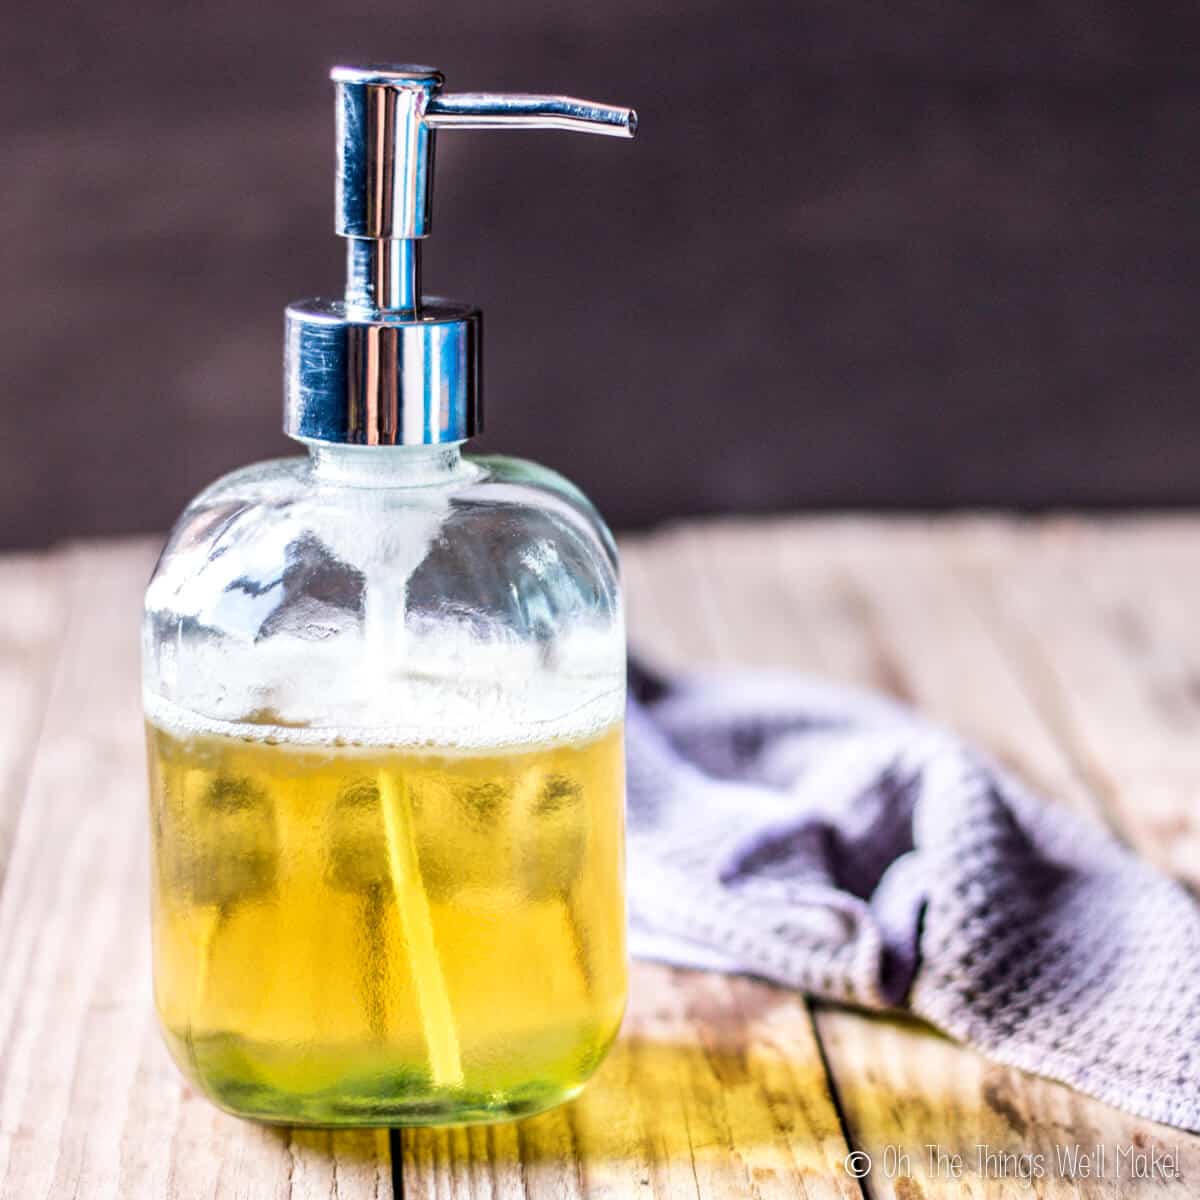 A bottle of homemade liquid Castile soap in a soap dispenser next to a washcloth.